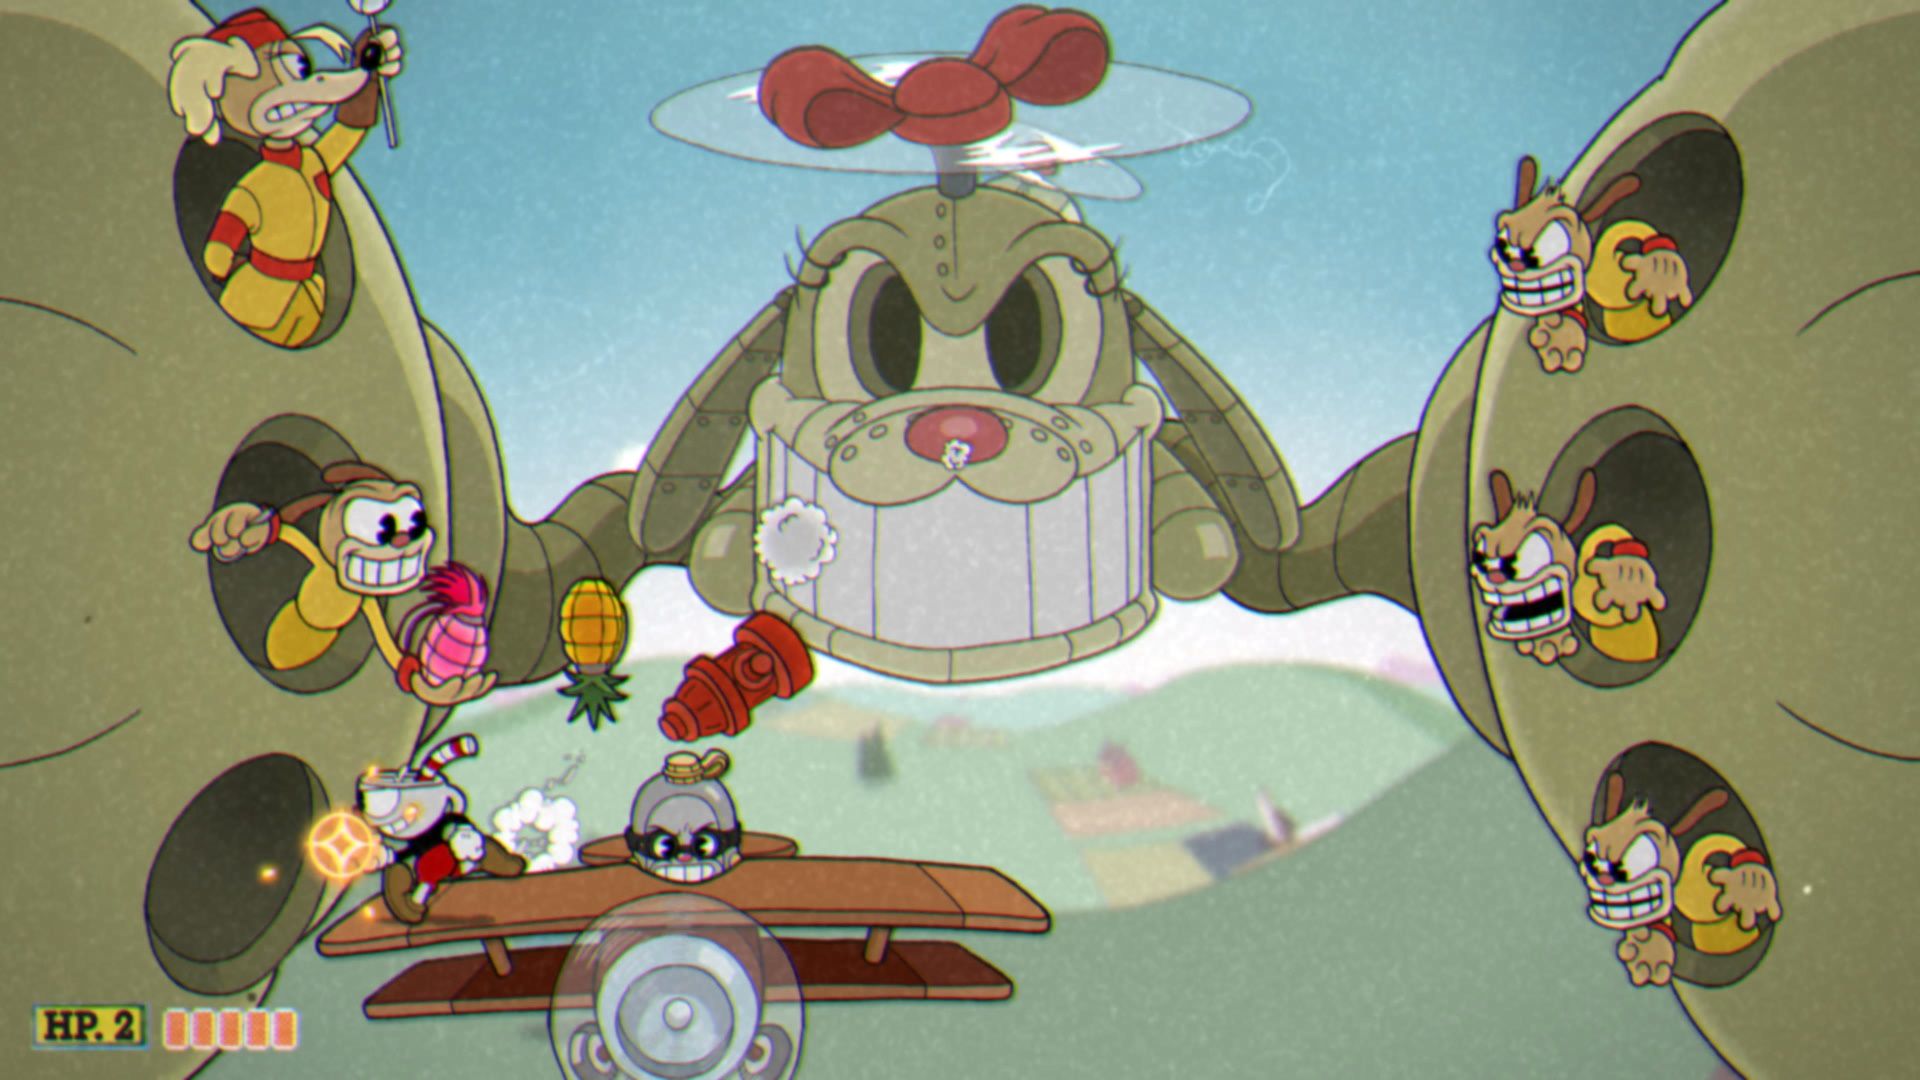 Cuphead The Delicious Course, The Howling Aces, Phase 3 Alternate, Pure chaos